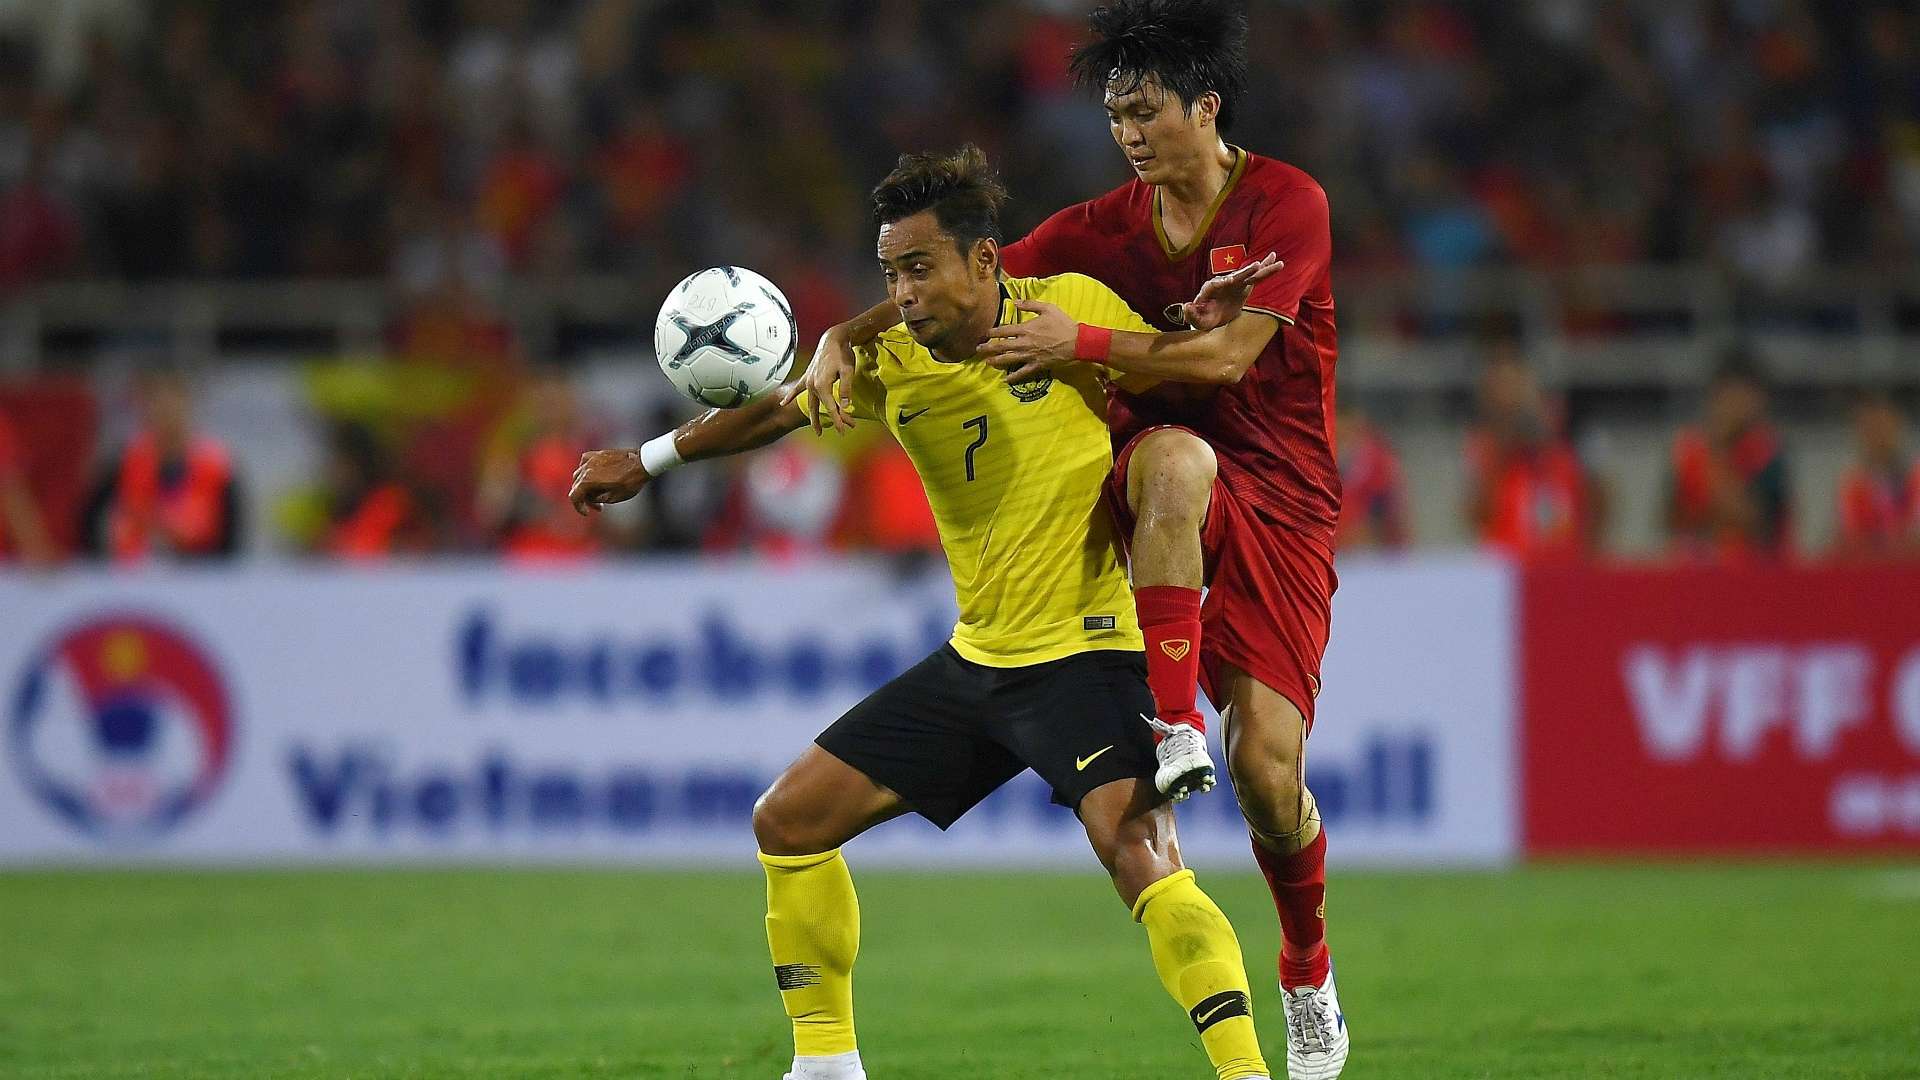 Aidil Zafuan, Vietnam v Malaysia, World Cup qualifier, 10 Oct 2019